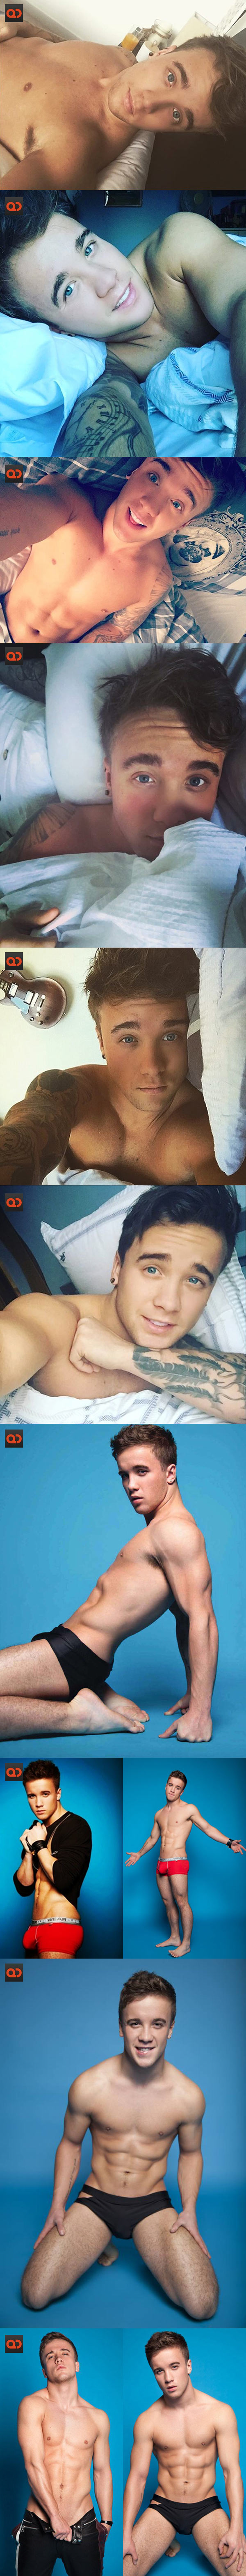 qc-exposed_celeb_sam_callahan_xfactor_alleged_snapchat_cock_photo-collage02